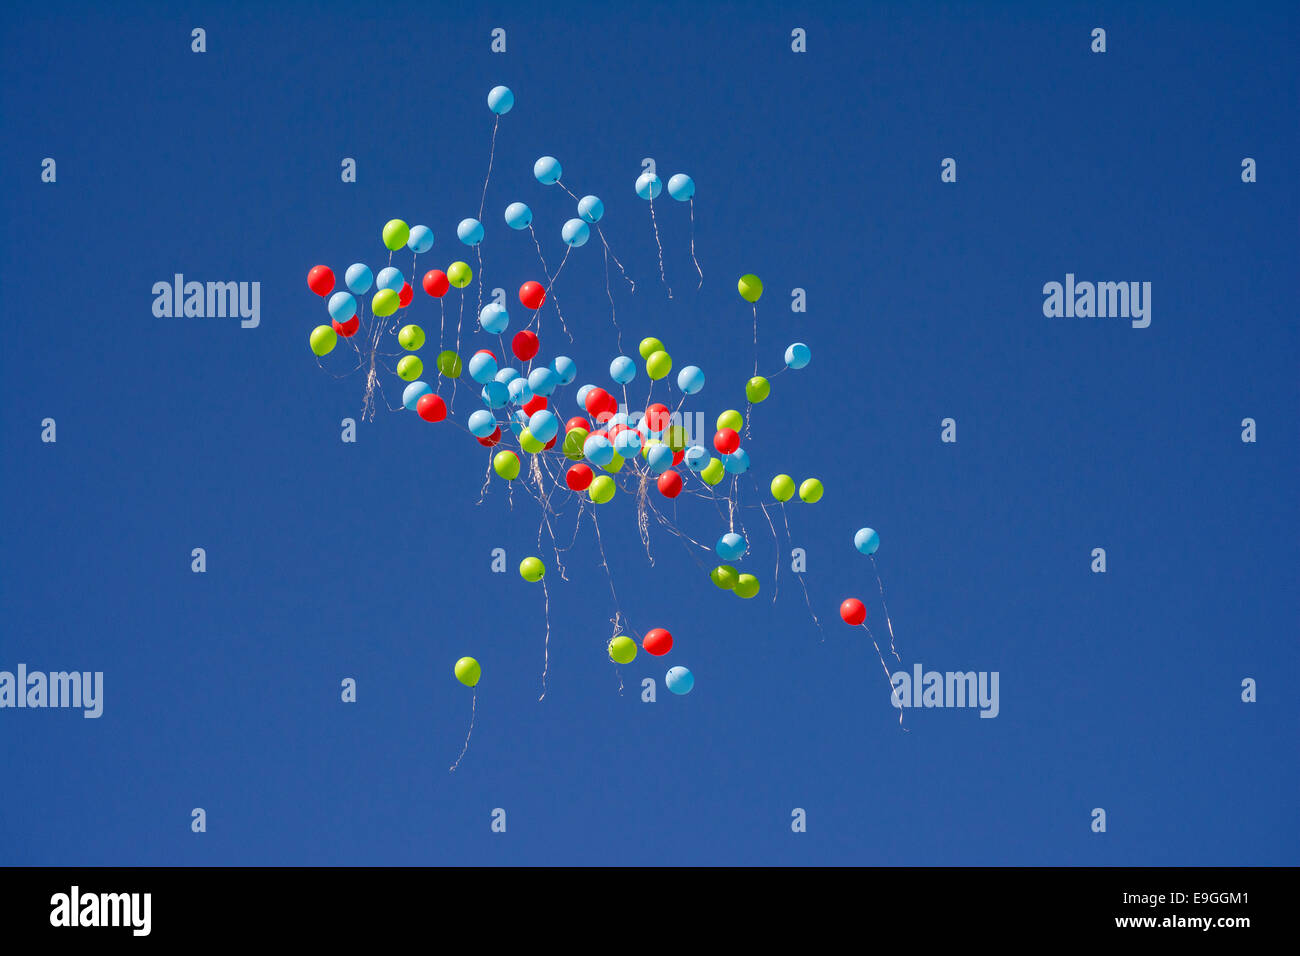 Balloons floating off high in the sky Stock Photo